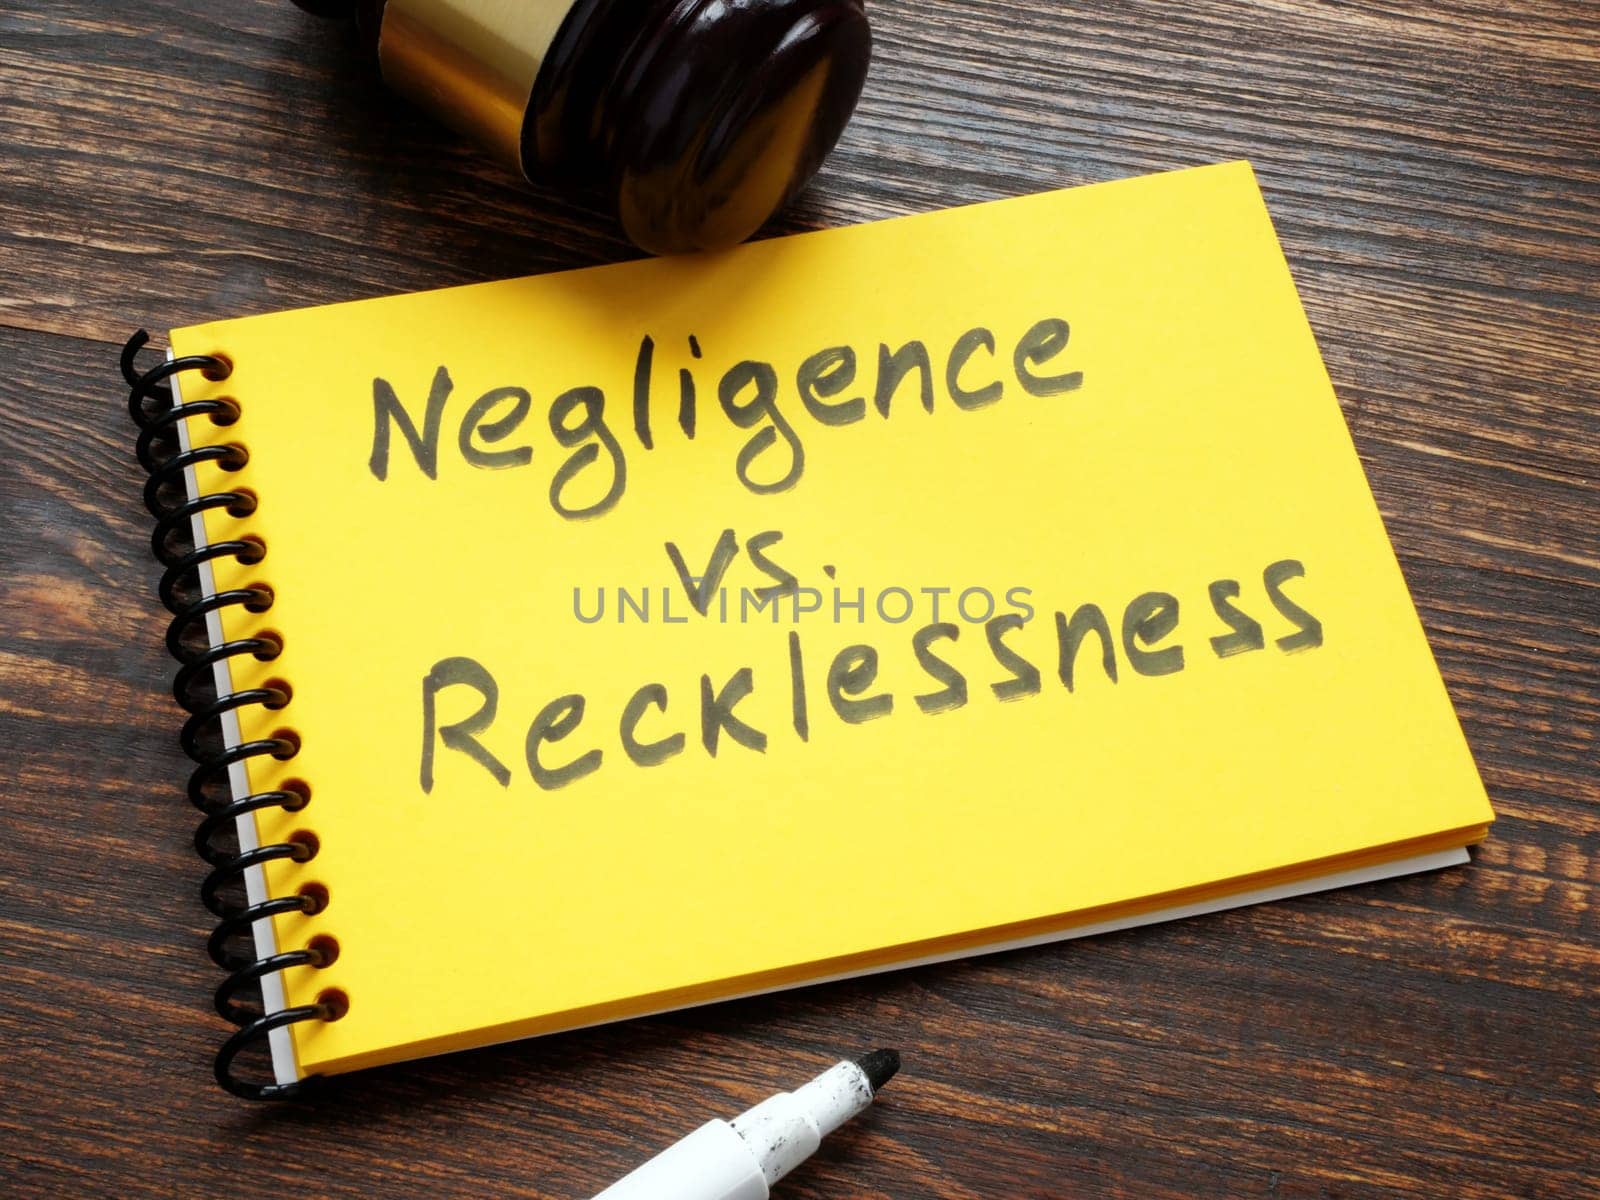 Negligence vs recklessness inscription and a gavel. by designer491